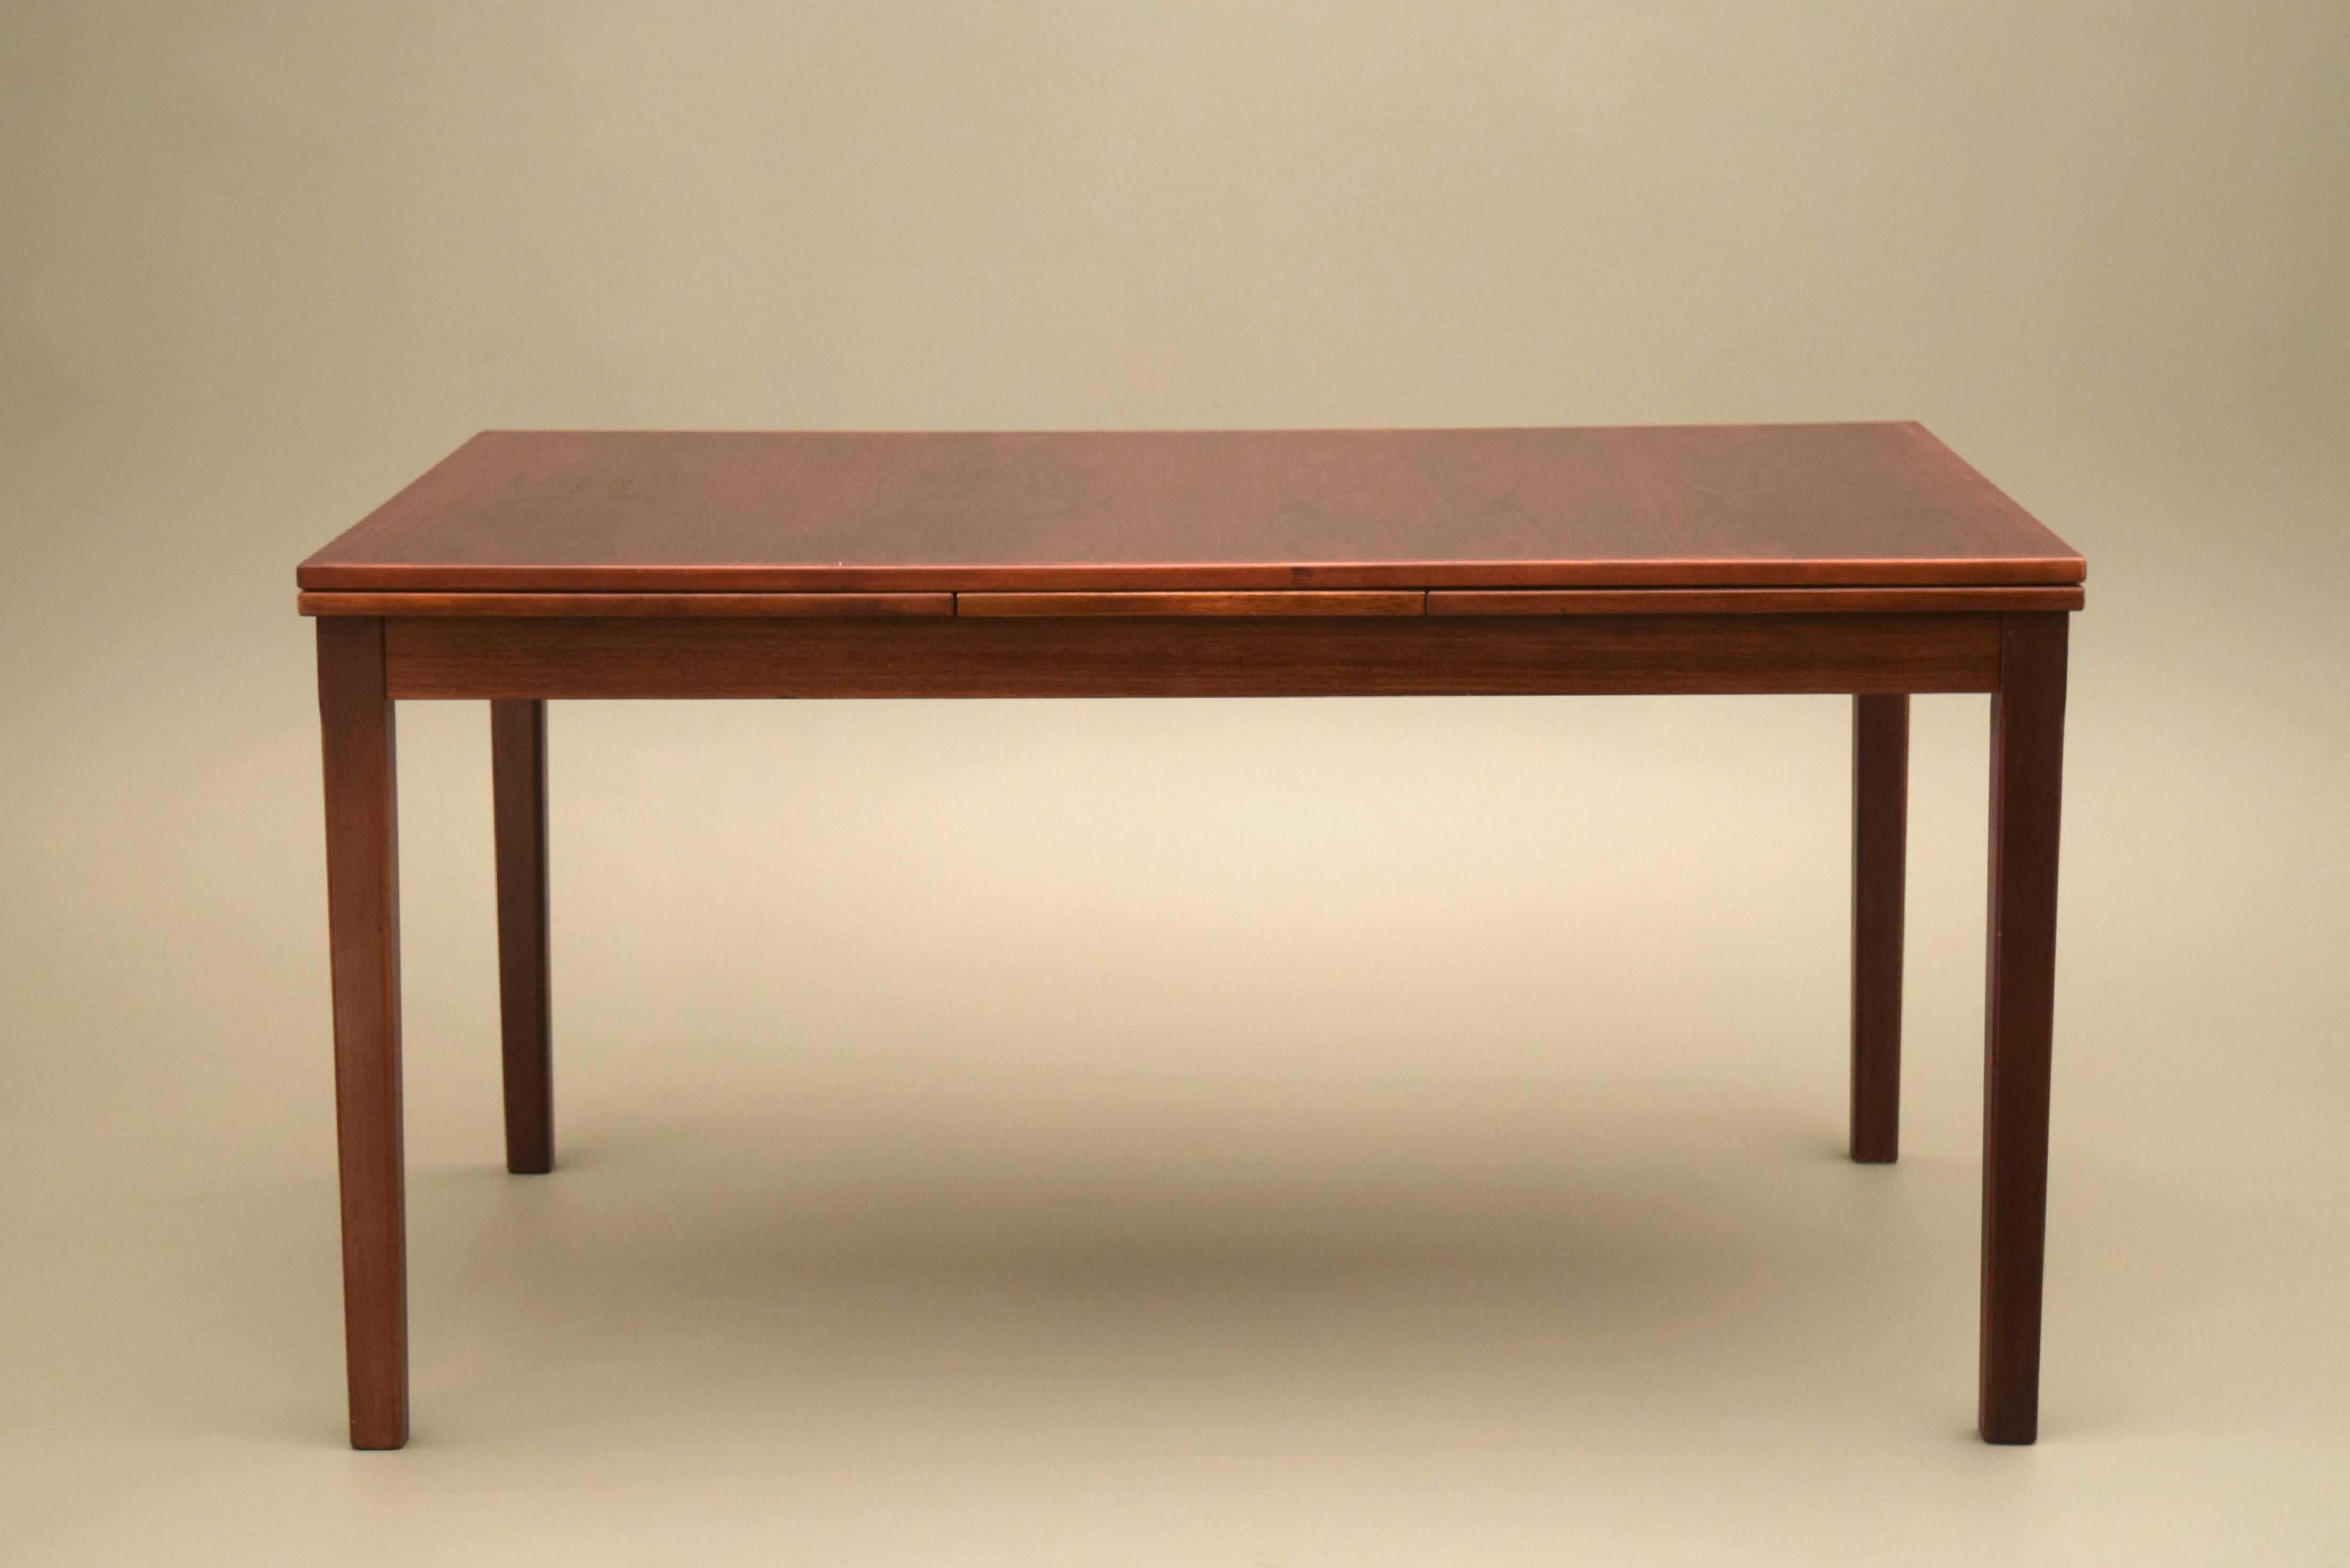 Gorgeous rosewood Danish Modern dining table by Willy Sigh of H. Sigh & Sons of Denmark in 1961, fully marked and signed. 

This beautiful dining table features the finest quality Danish workmanship throughout.  Seats up to eight comfortable when